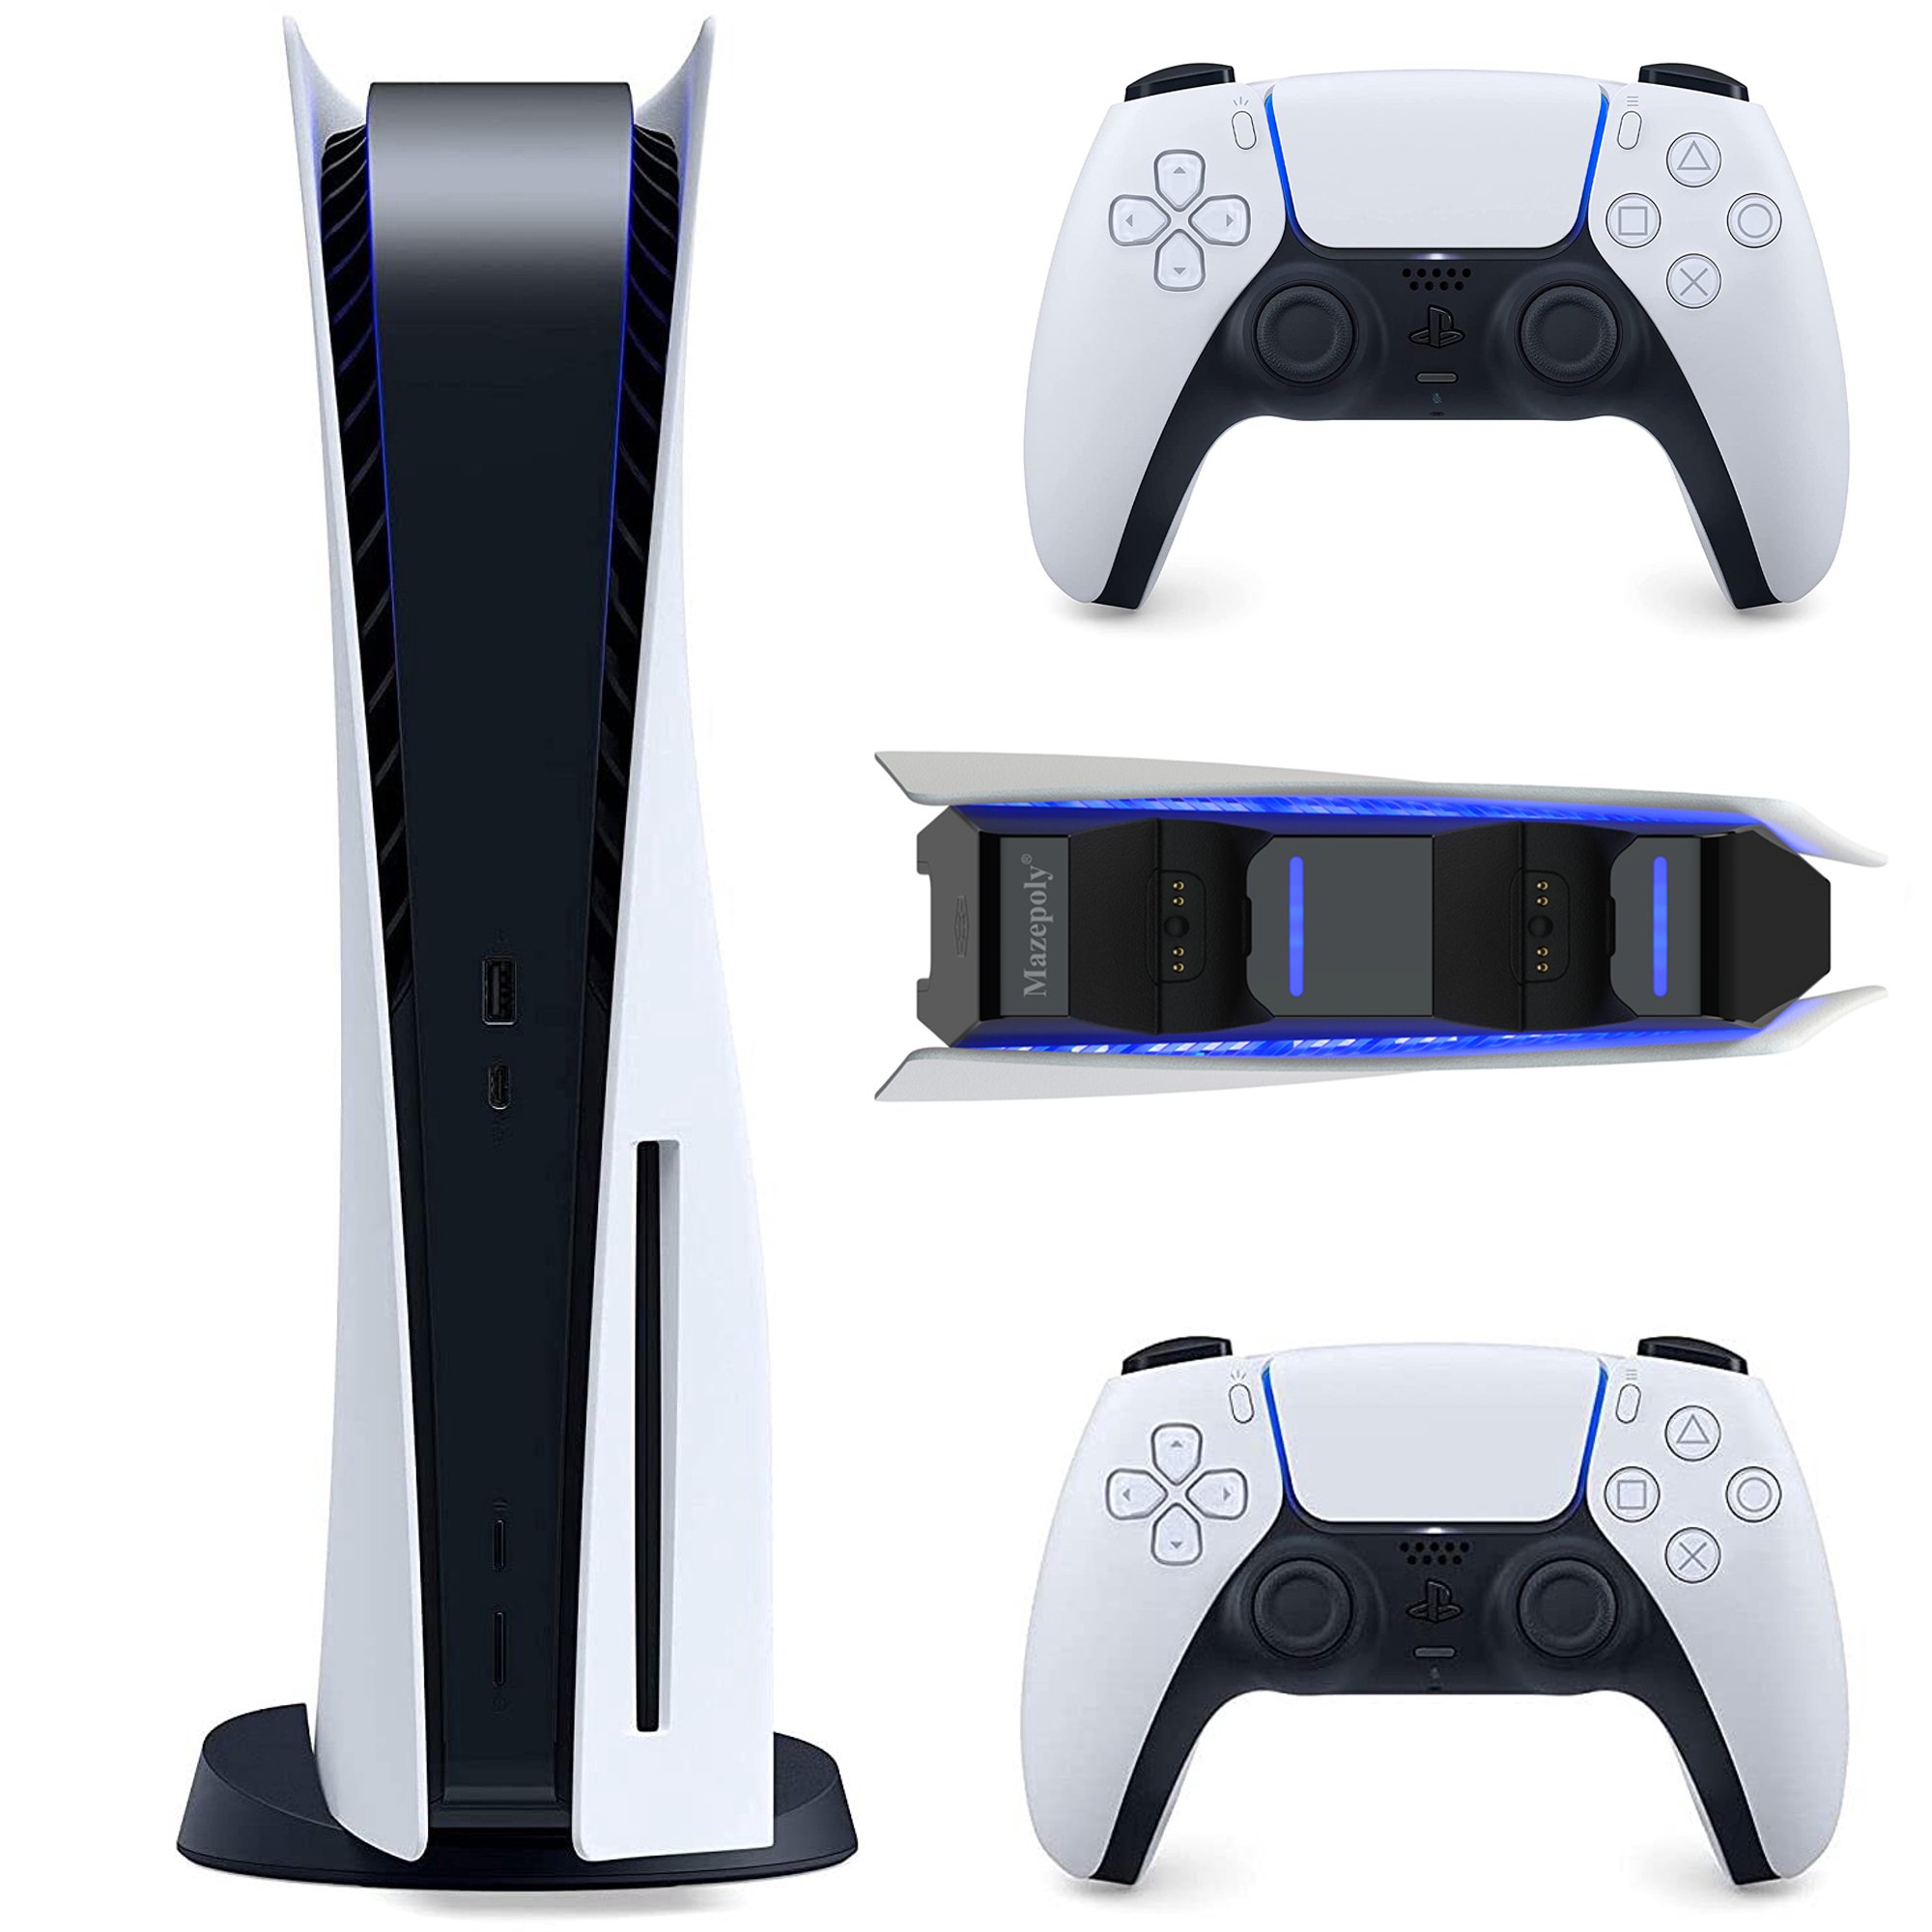 Used-Like-New PlayStation 5 (PS5) Console Disc Version, Two Wireless  Controllers, with Mazepoly Dual Charger Dock for PS5 Controller 